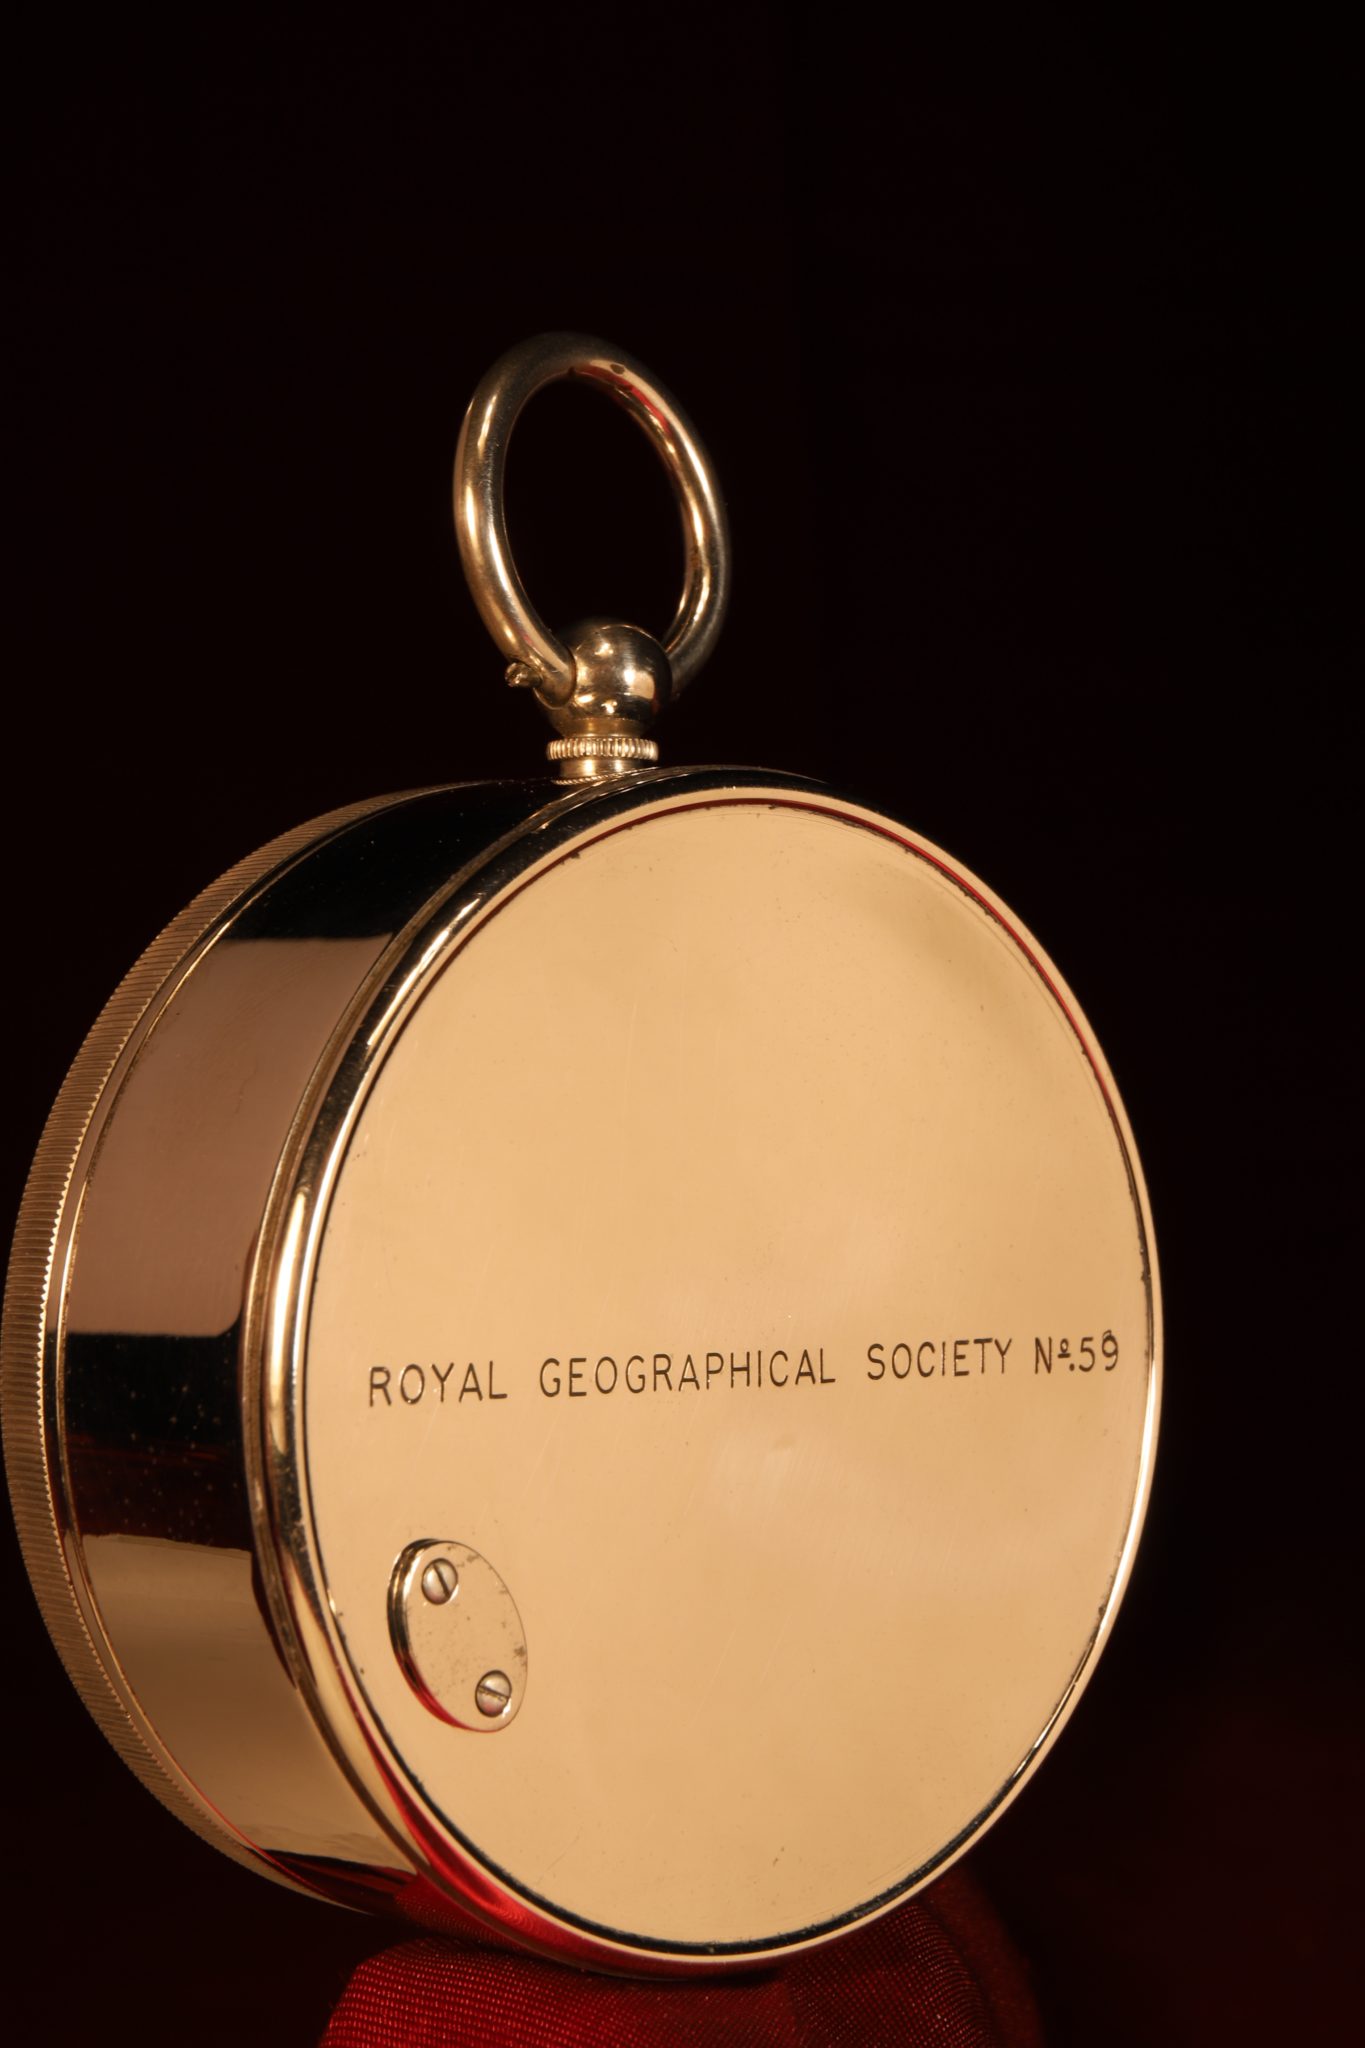 Royal Geographical Society Pocket Altimeter No 59 by Casella